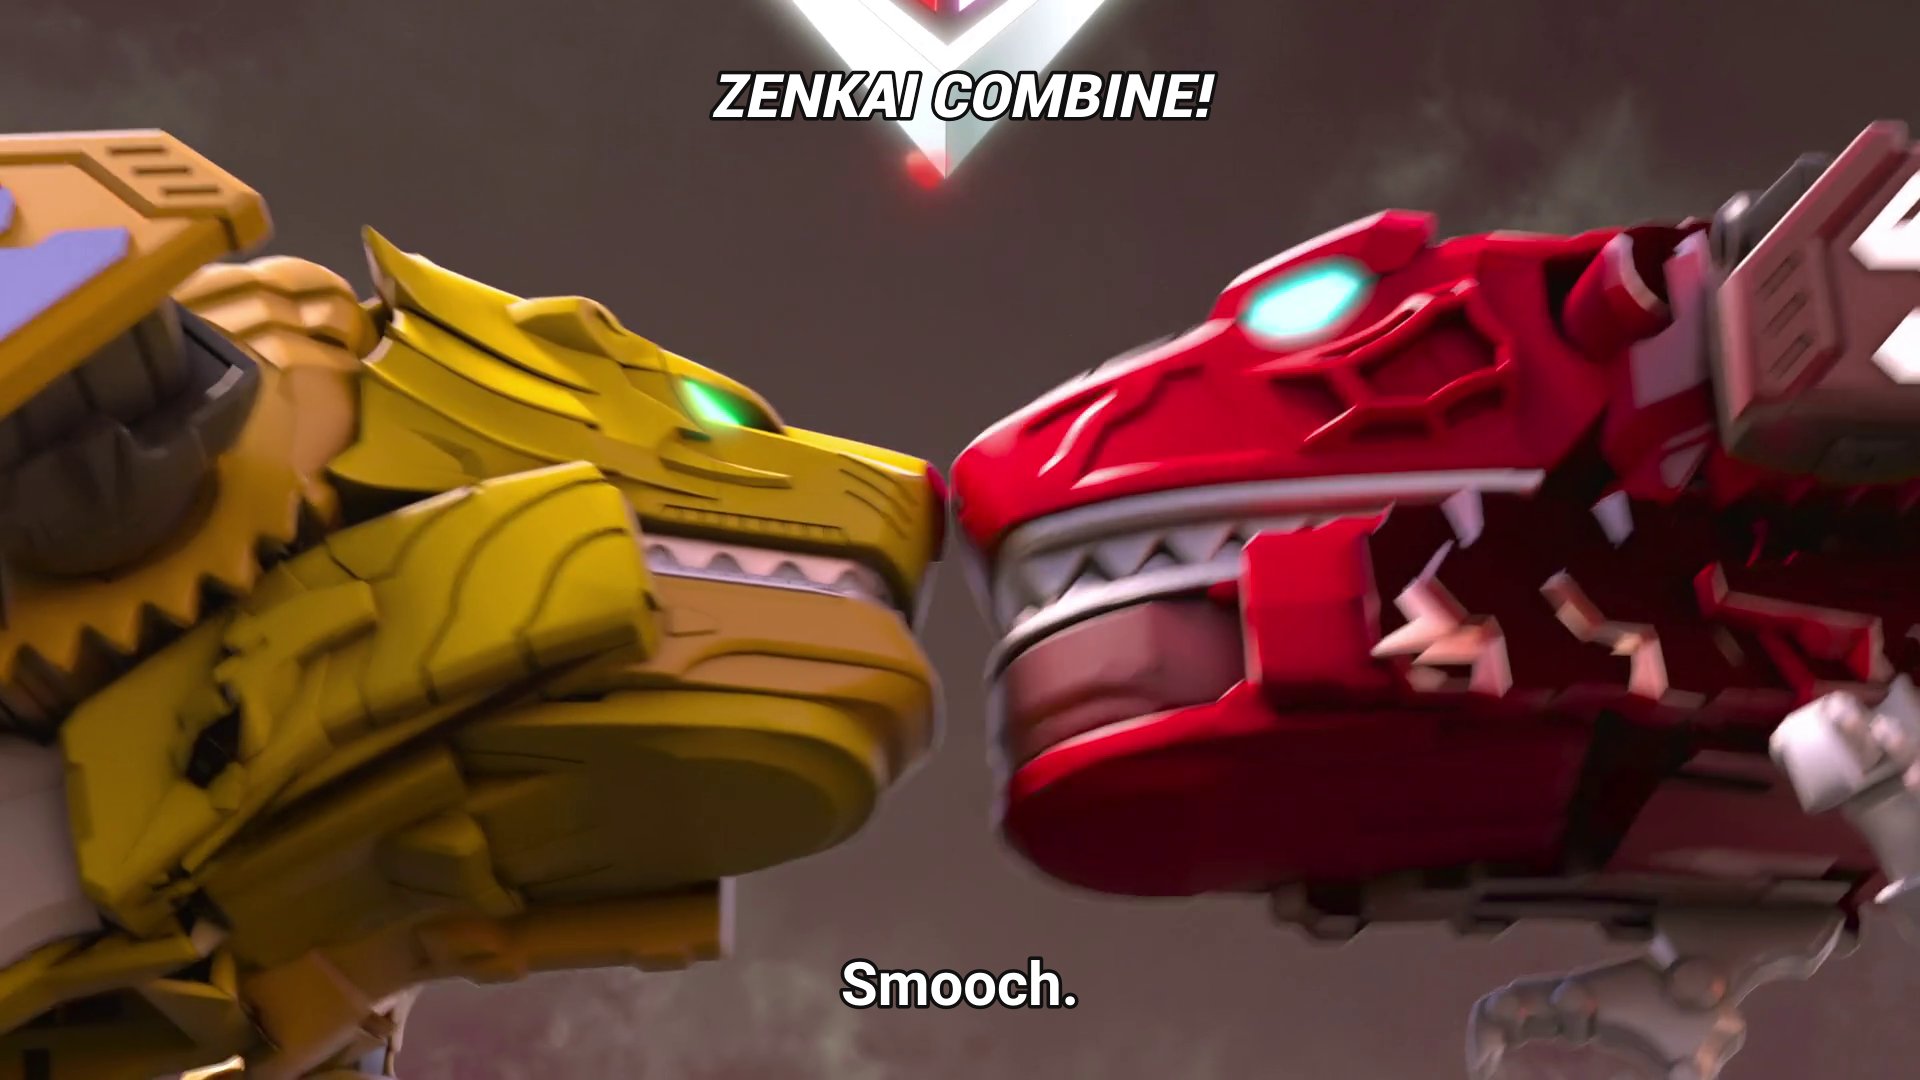 Gaon and Zyuran robot forms touching noses.  Subtitles: Smooch.